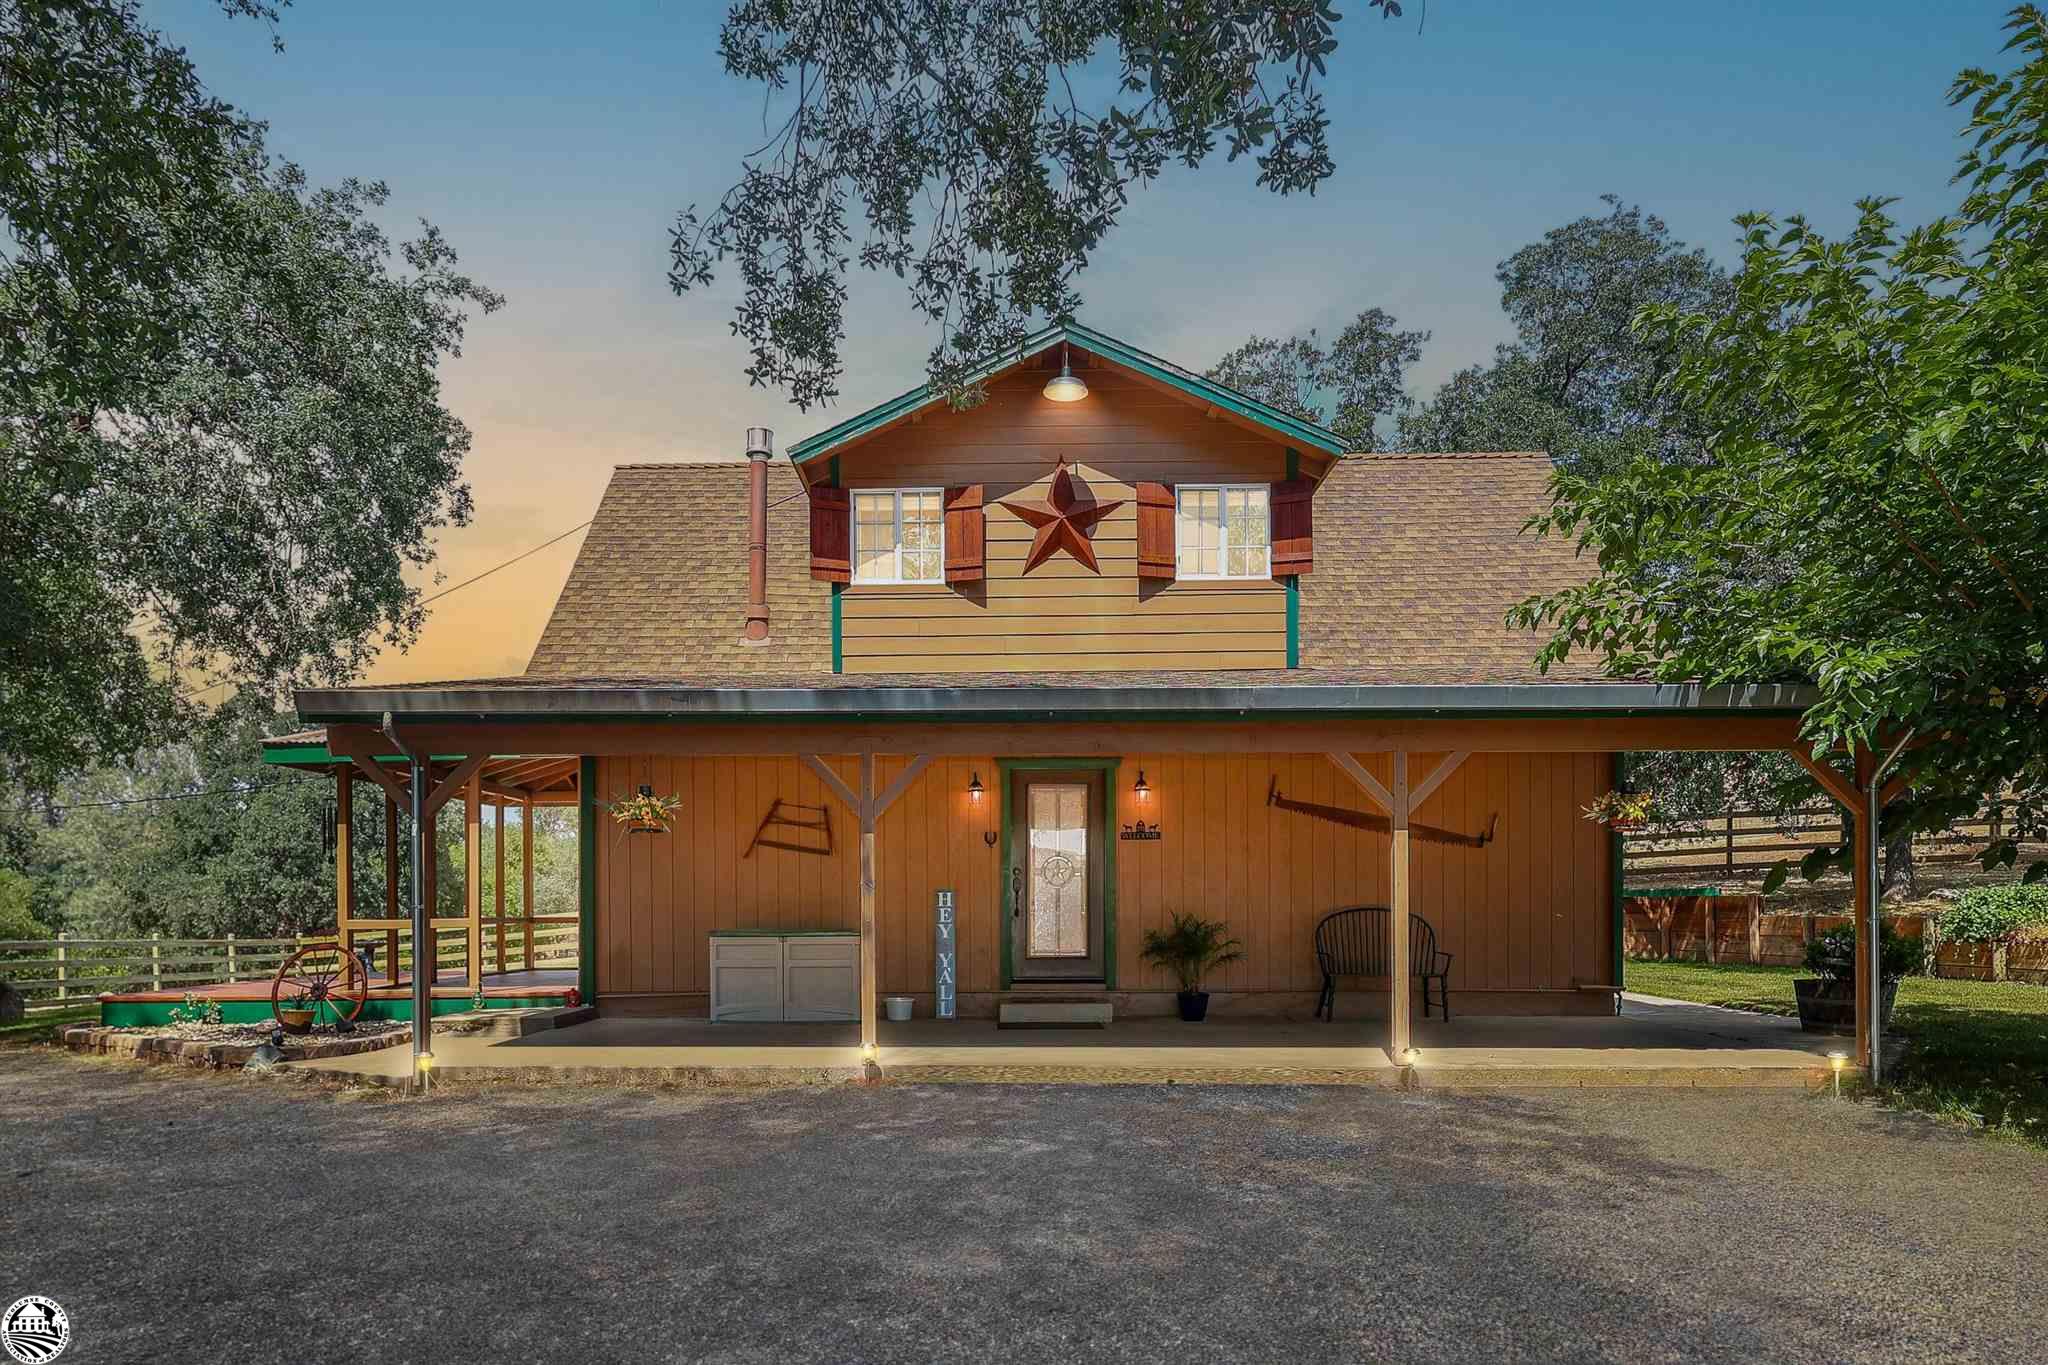 Here is your opportunity to own and live at a horse ranchette. Hold on to your spurs as this property is set up for a move-in ready ranchette.  The horses have a four-stall Behlen Mare Motel with attached tack and feed room. On the side of the Behlen Mare Hotel is a MD Barn Master wash station. On the 4.68 acres there are three more out buildings and a single family residence. The other buildings include an extra large carport (22’W x 25’L x 12’ high), a shop that can be converted to a guest quarters, and a storage shed. Furthermore, the acreage is currently split into three sections in order to have different breeds of animals or 4H projects. The property is fenced and cross fenced with non-climbing fencing to ensure the safety of your animals.  After a hard day's work on the ranch, you can retire to a beautiful home. This three bedroom, one bathroom farmhouse has been tastefully upgraded throughout. The kitchen has beautiful granite countertops, stainless steel appliances, and a great view from the sink. A Vermont casting wood stove will keep you warm in the winter and an evaporative cooler will keep you cool in the summer. Furthermore, the first floor has engineered hardwood that is simply stunning. The updated windows allow tons of light in and you have great views from every window. The remaining two bedrooms are upstairs with a spiral staircase to lead you up. In addition, new vinyl plank flooring has been installed on the second floor.  The house is on a well with a commercial built 3,500 gallon water storage tank. Outside the home there is new siding and a fresh coat of paint. This one-of-a-kind horse ranchette is waiting for its new owner. Please call and make an appointment today.